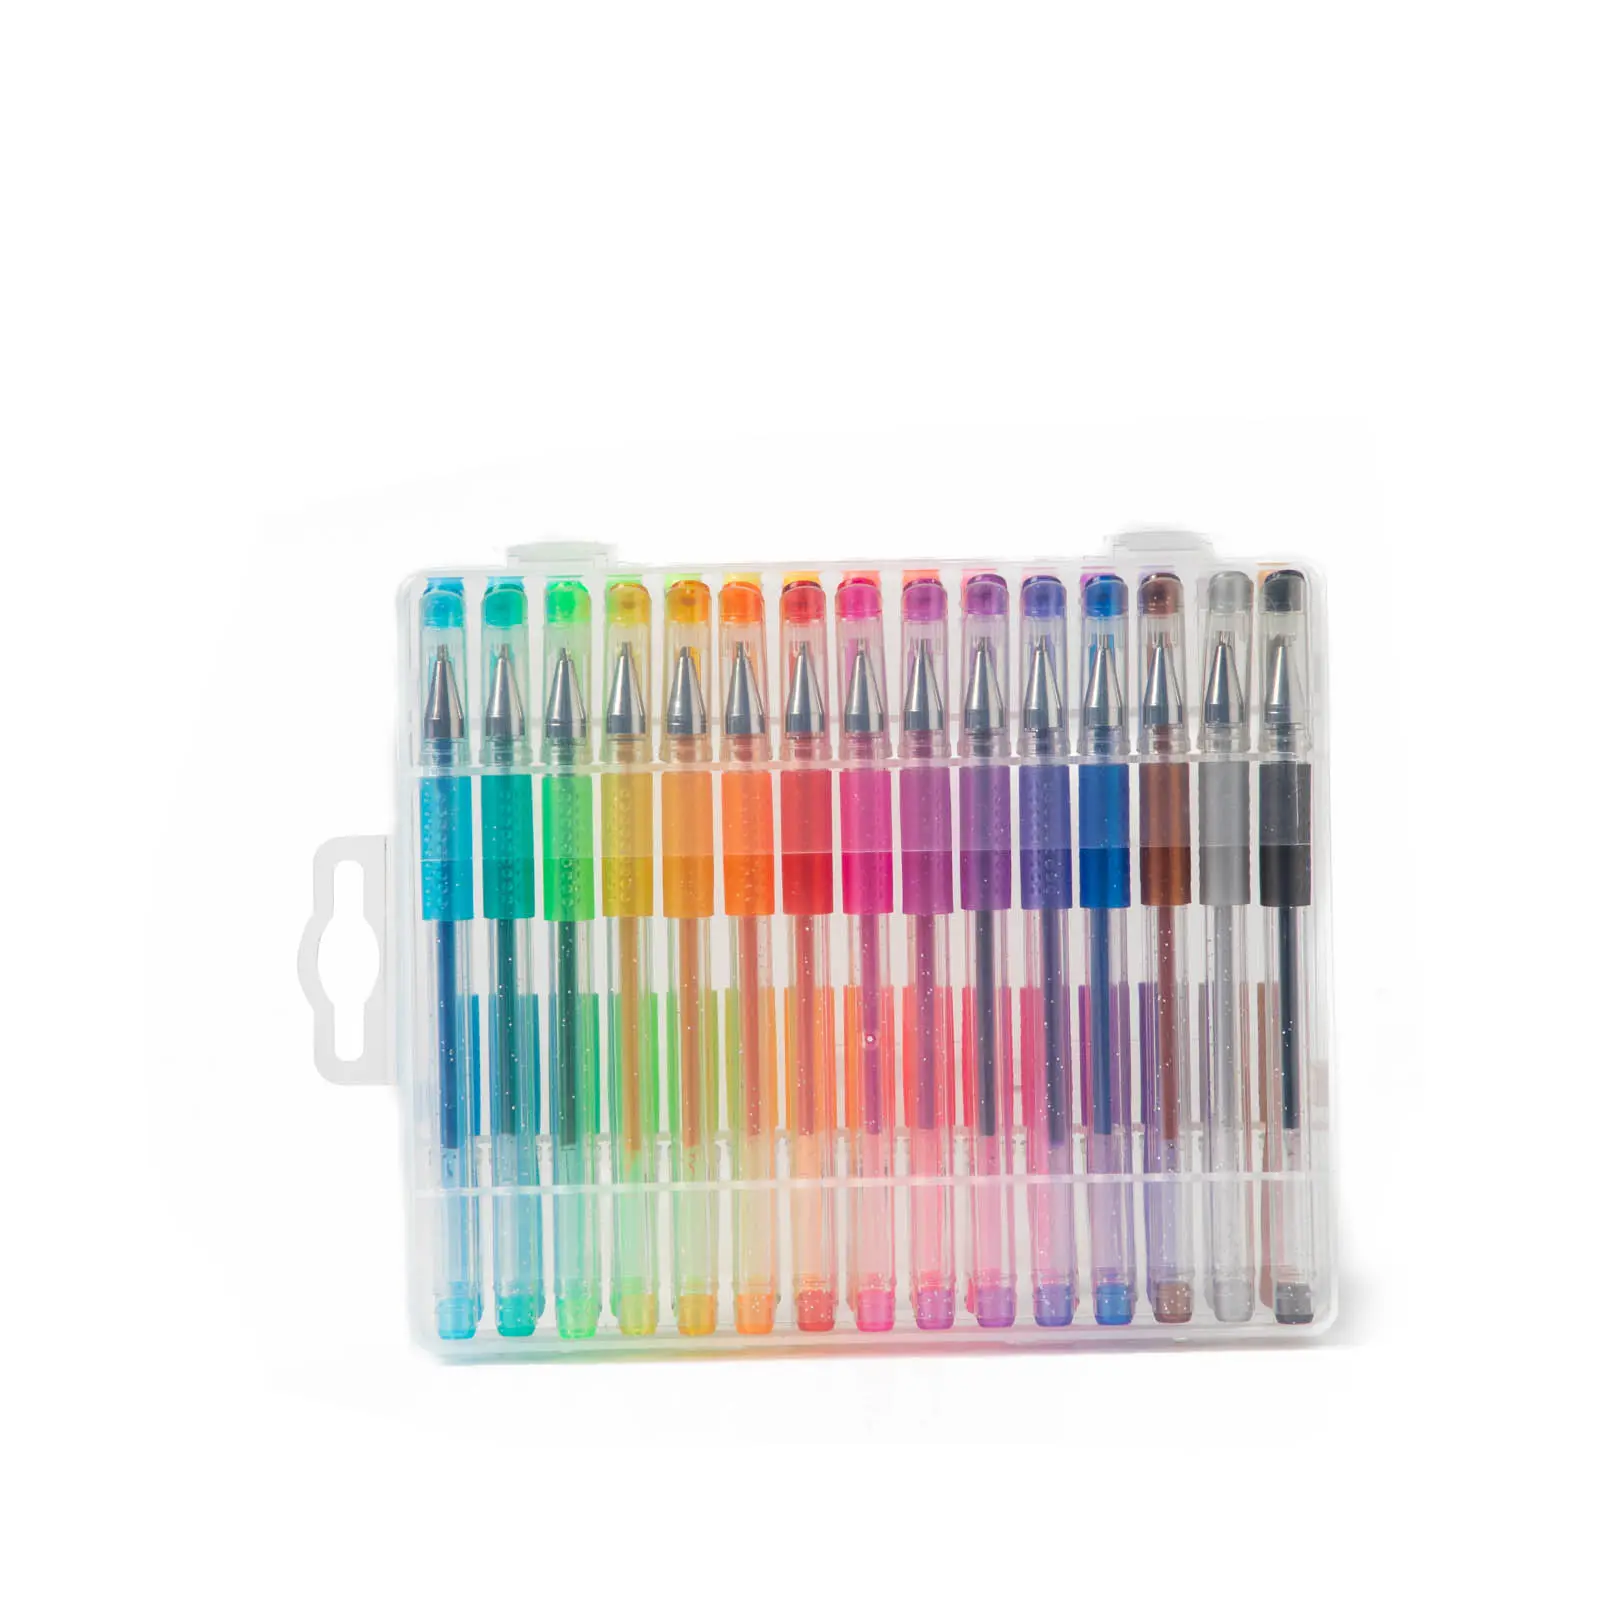 30-Packs Rainbow Gel Pen Set Pastel and Glitter Ink with Unique Colors